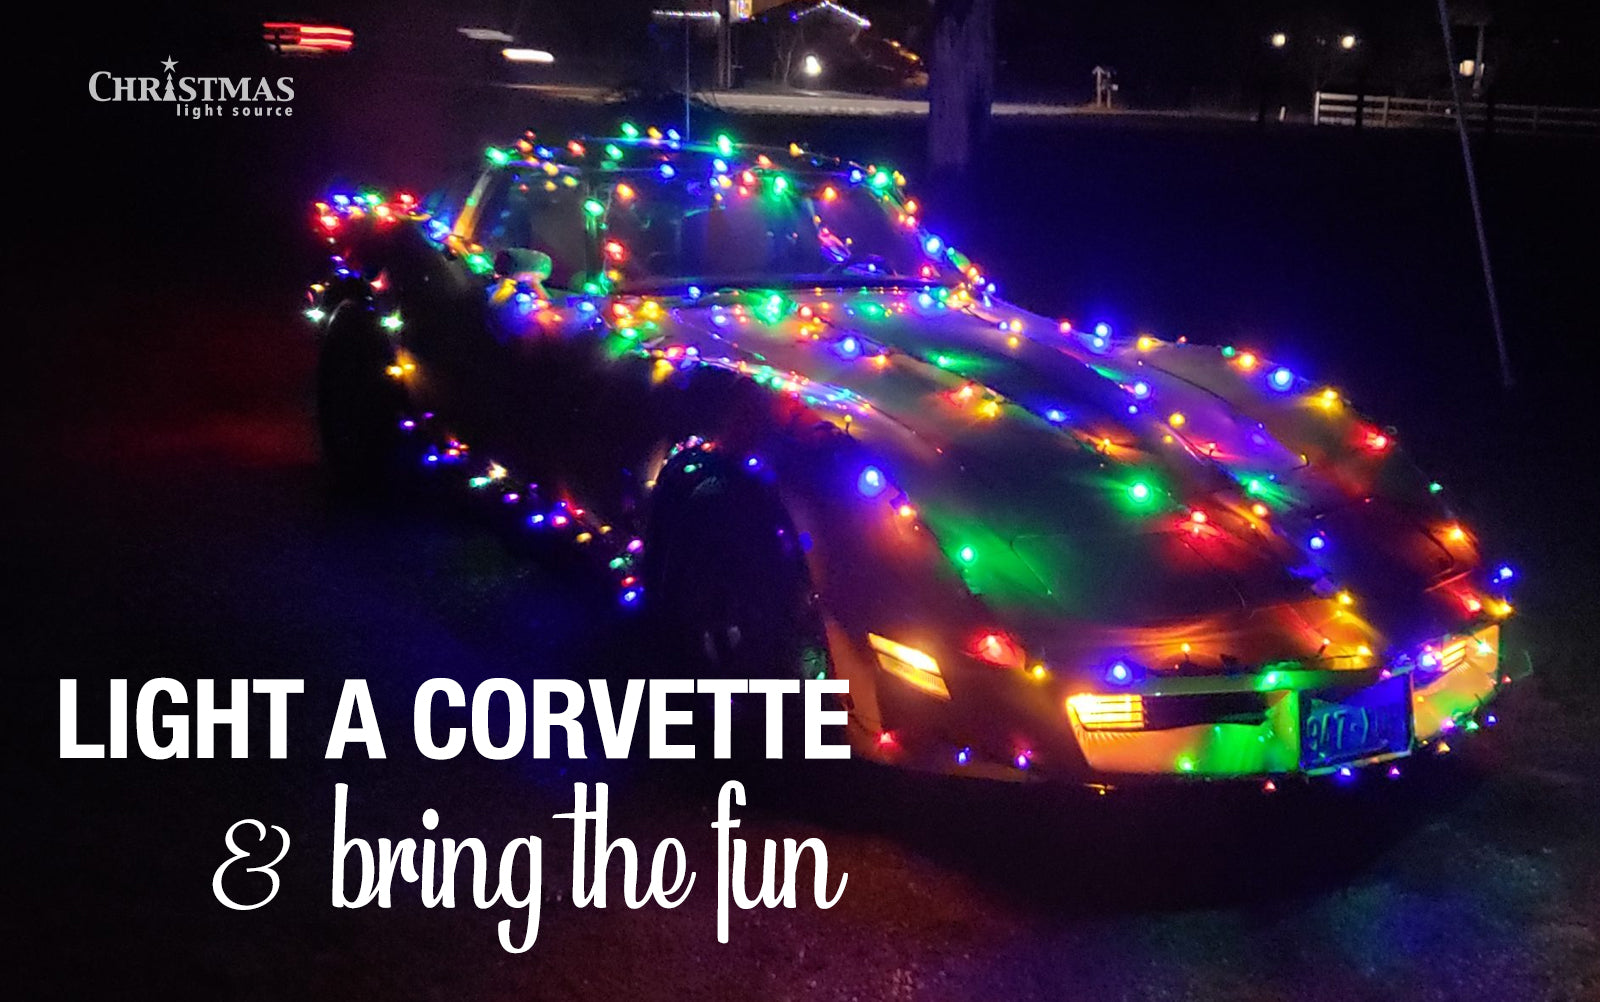 Get this Look: Light a Corvette and bring the fun!